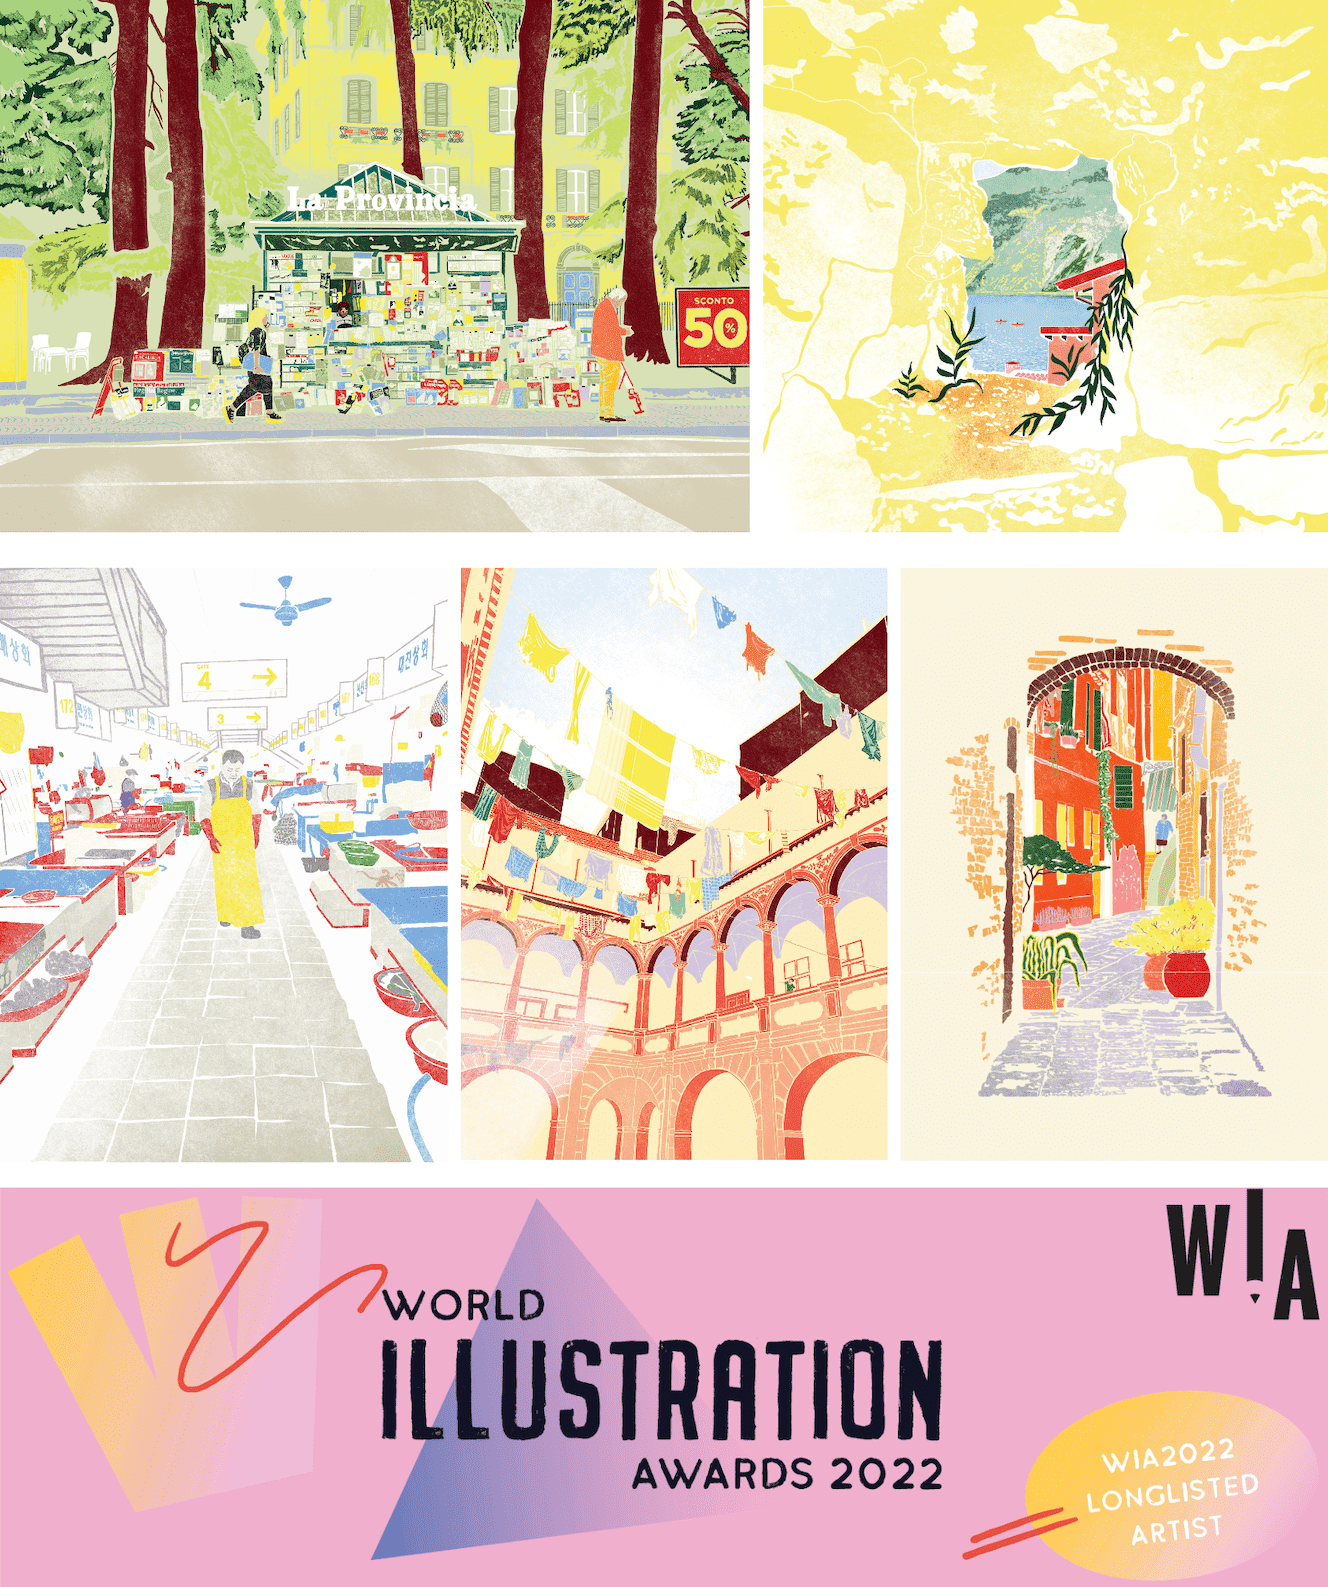 Colourful llustration and gif submits for 2022 World Illustration Awards Longlisted Artist 